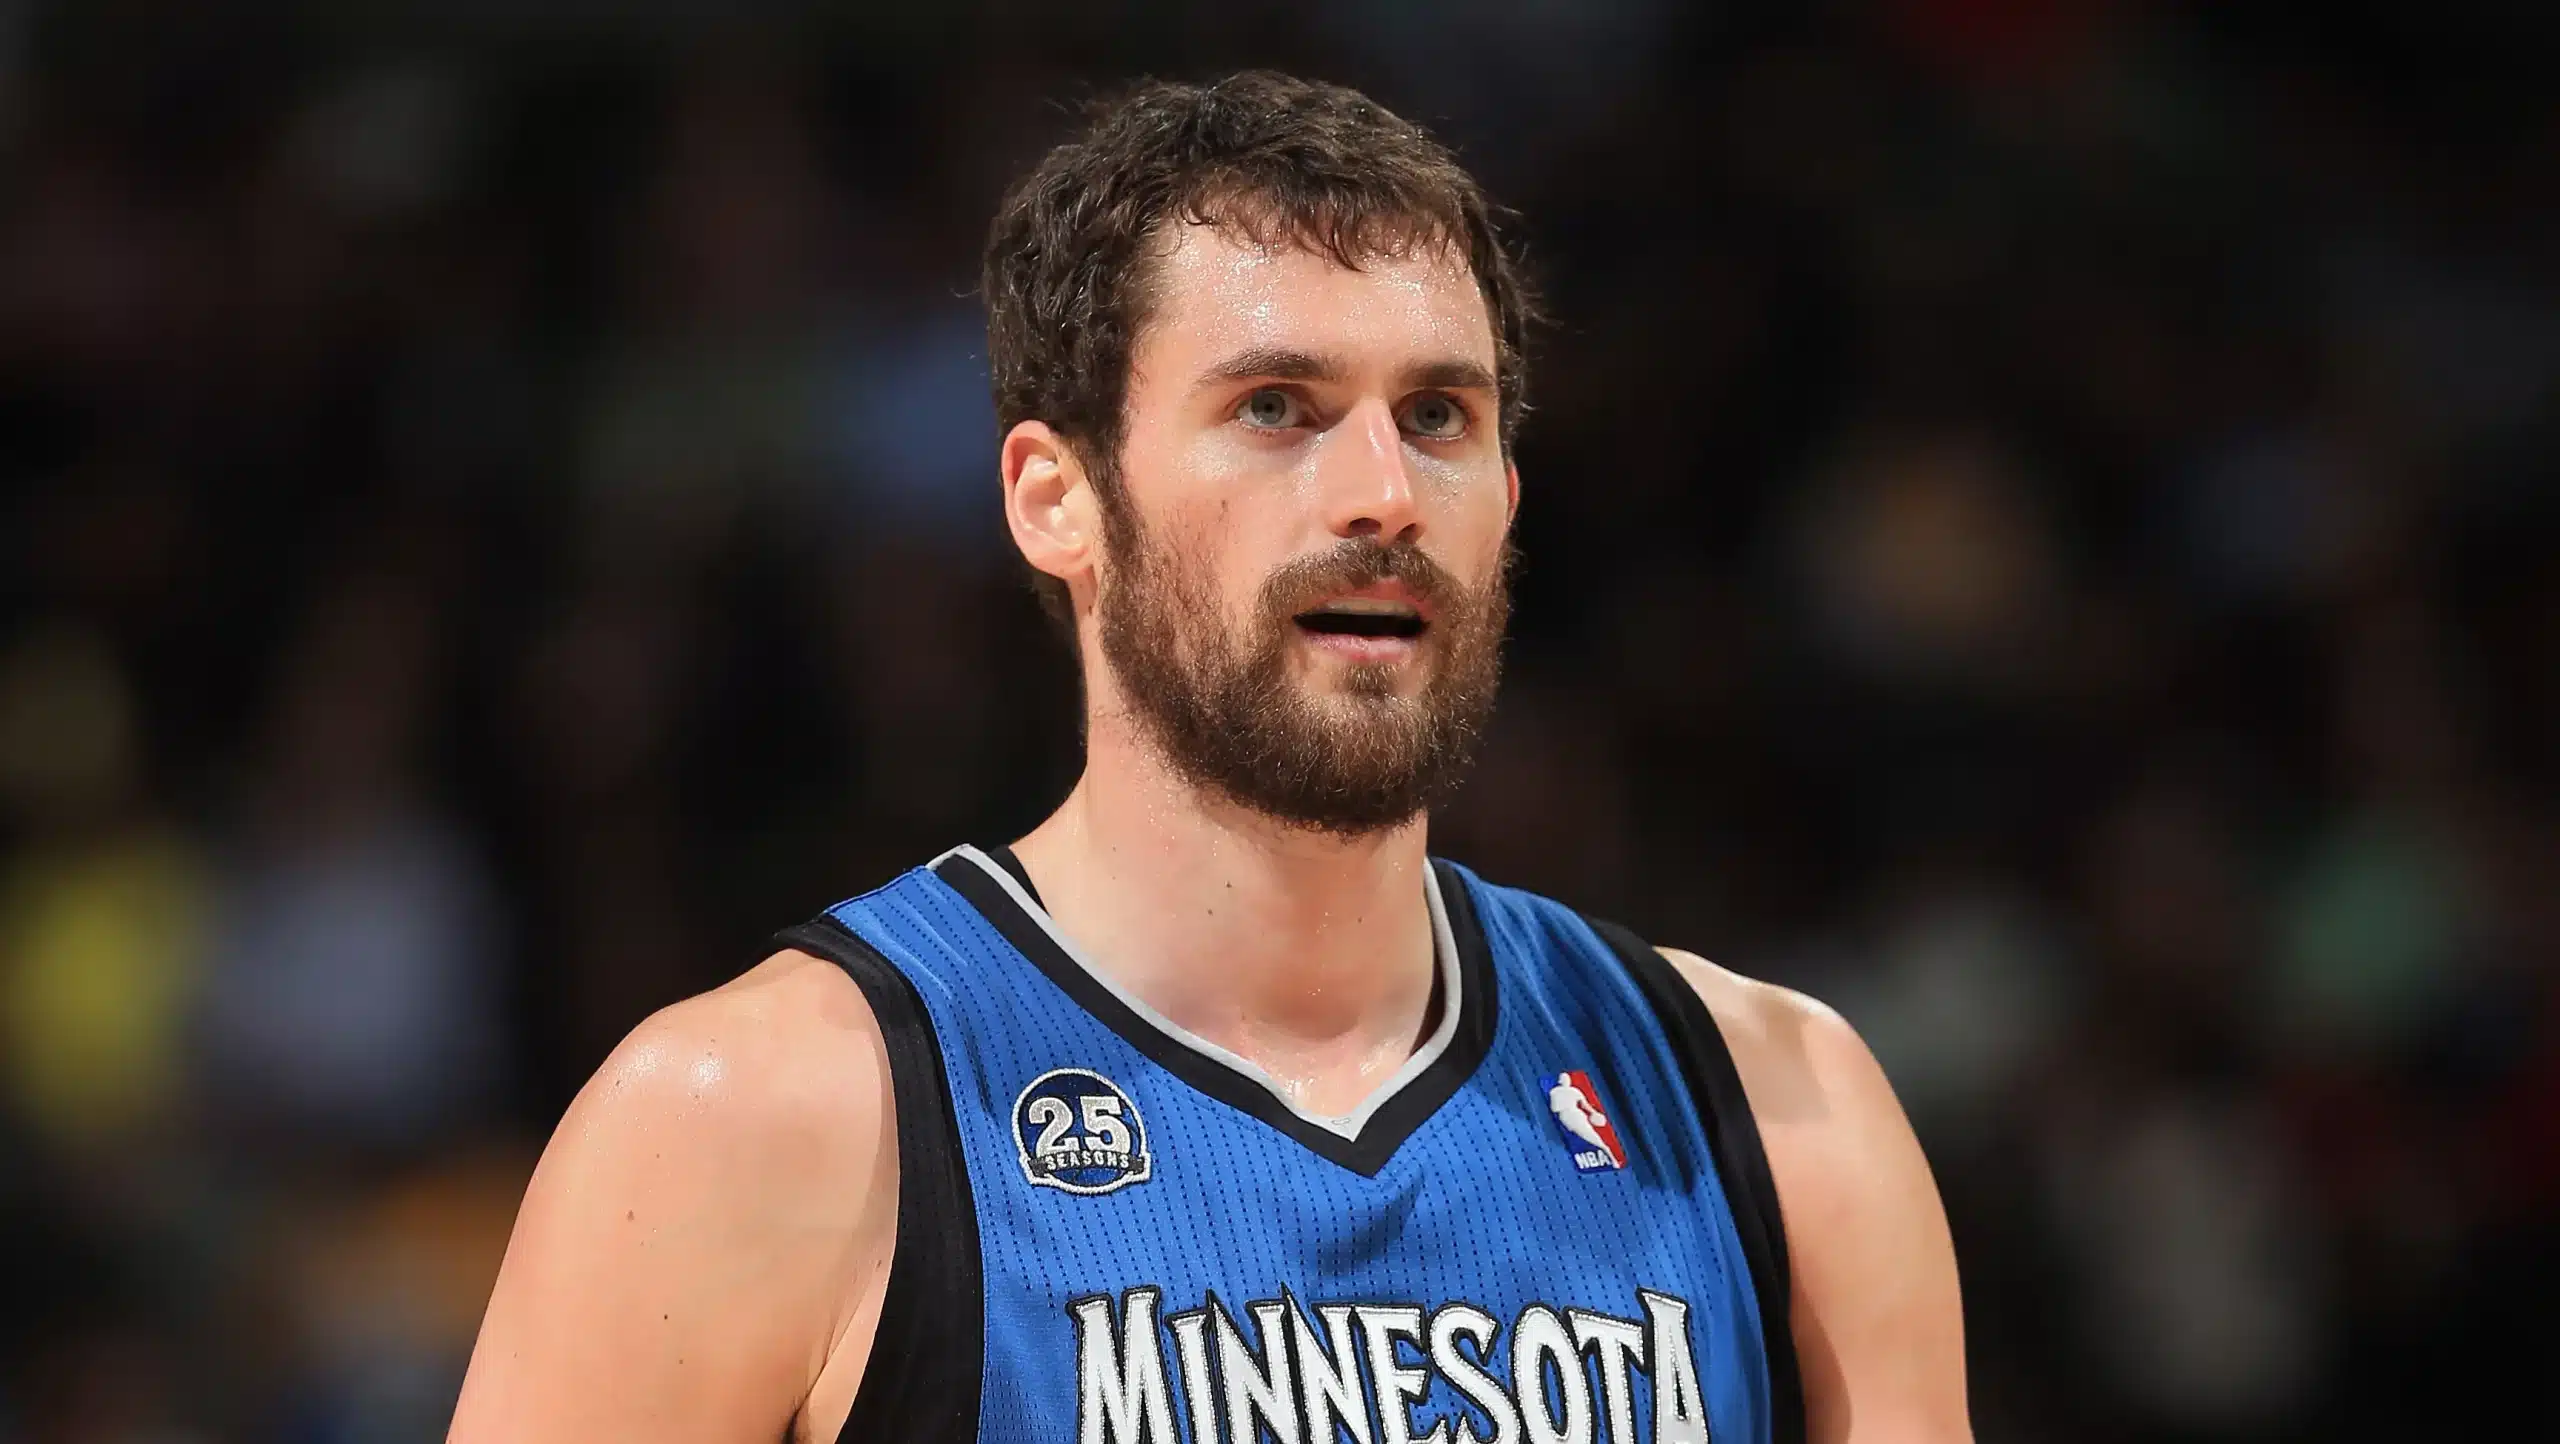 Where did Kevin Love start in the NBA?